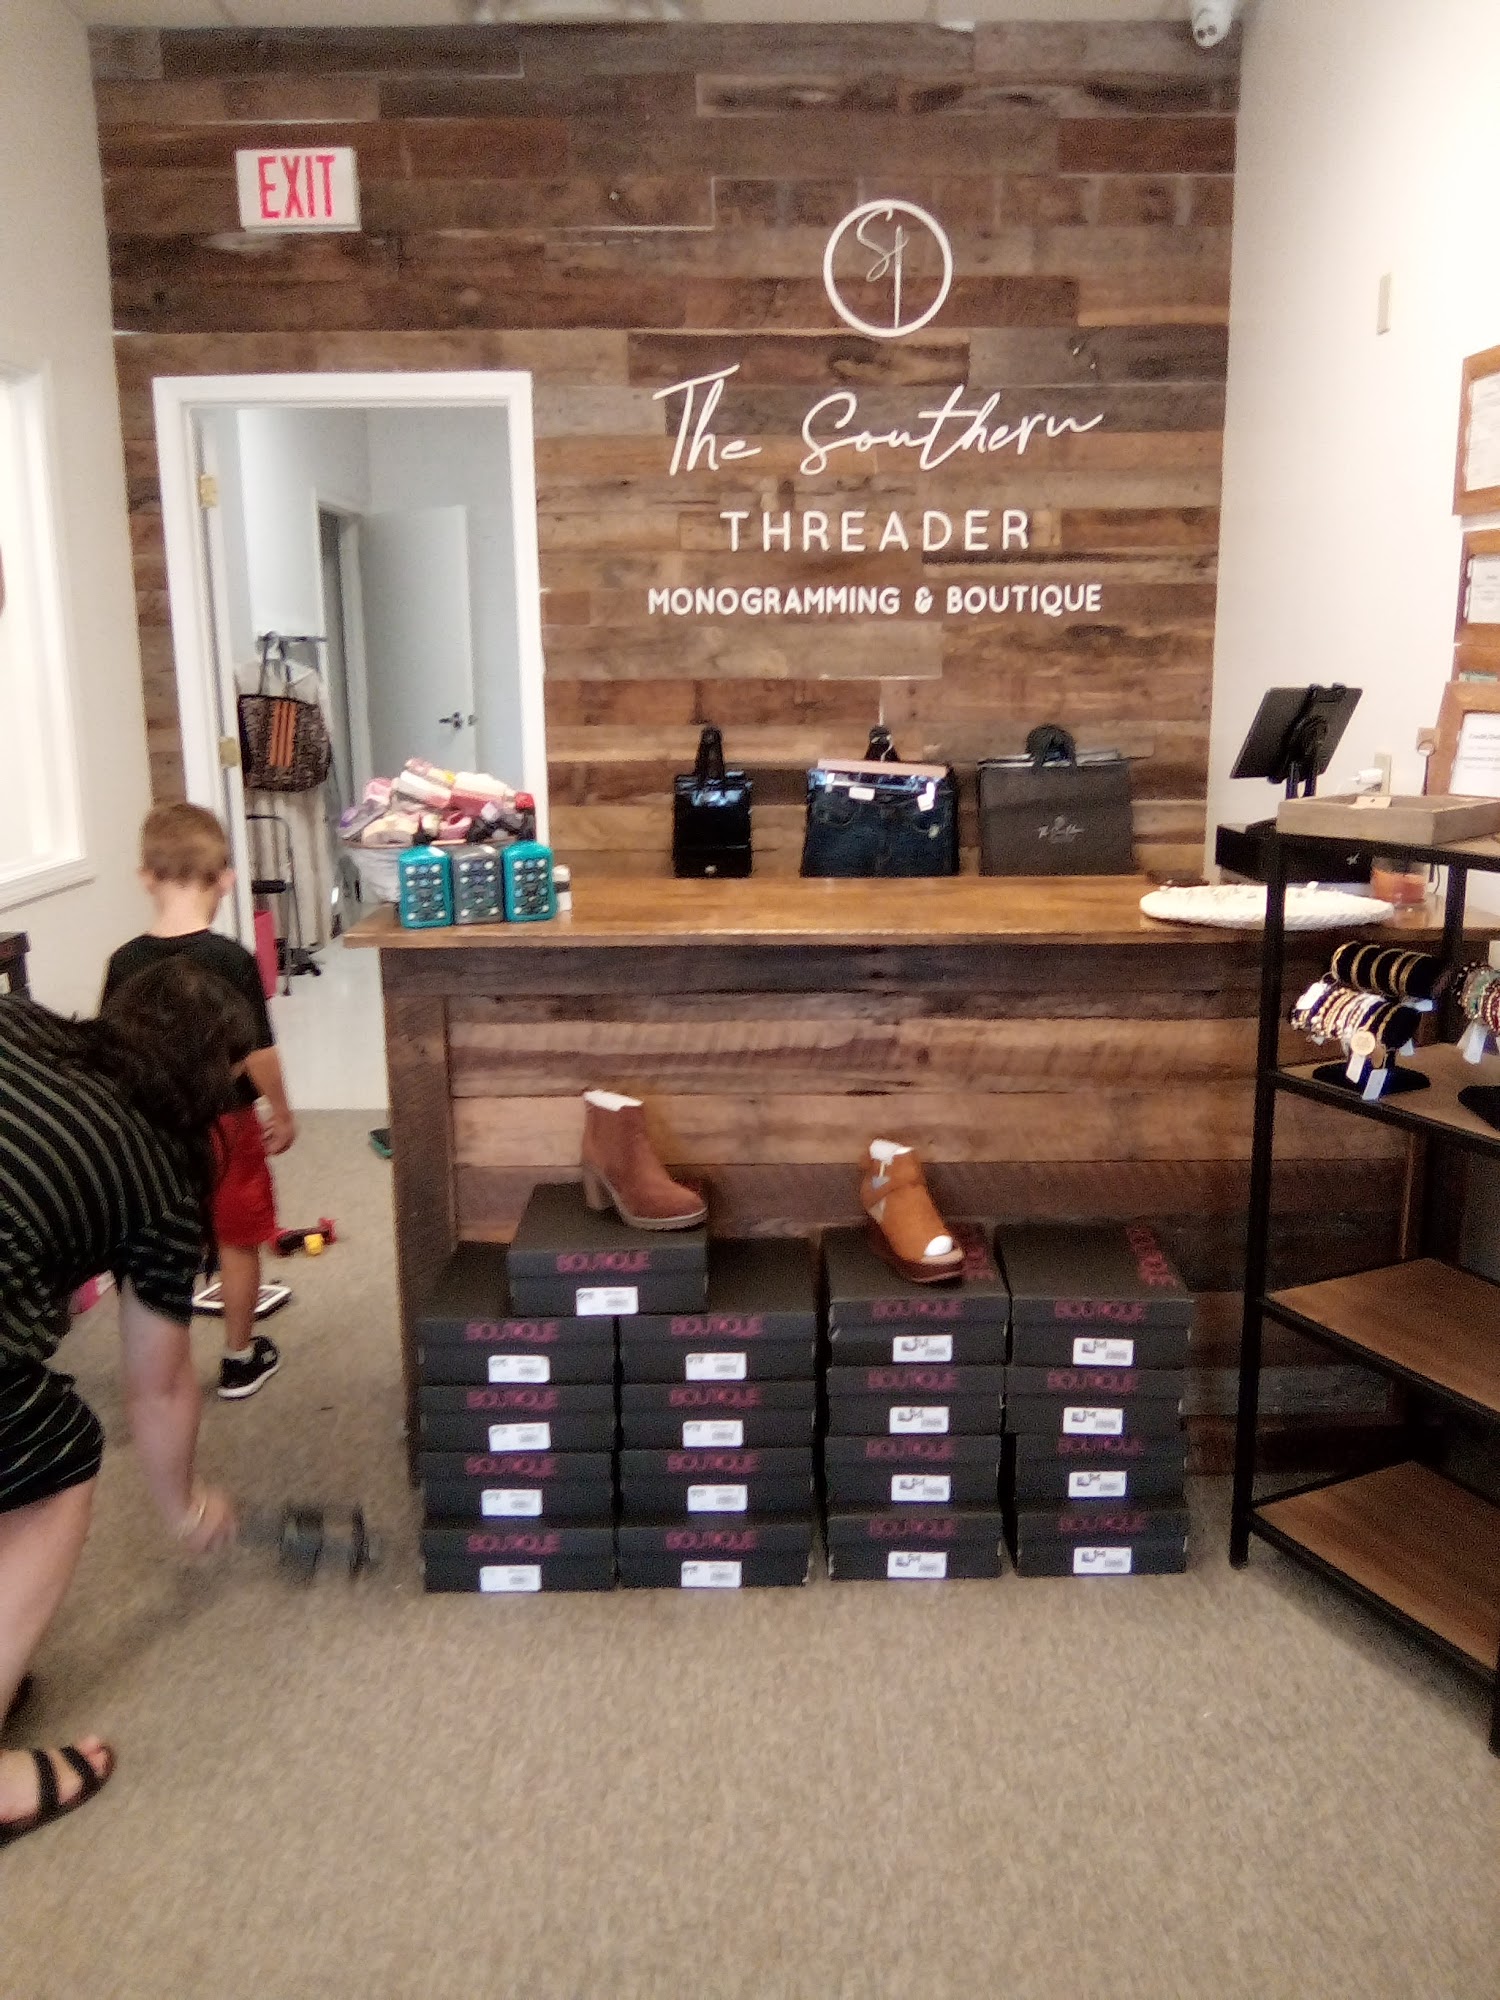 The Southern Threader Monogramming & Boutique